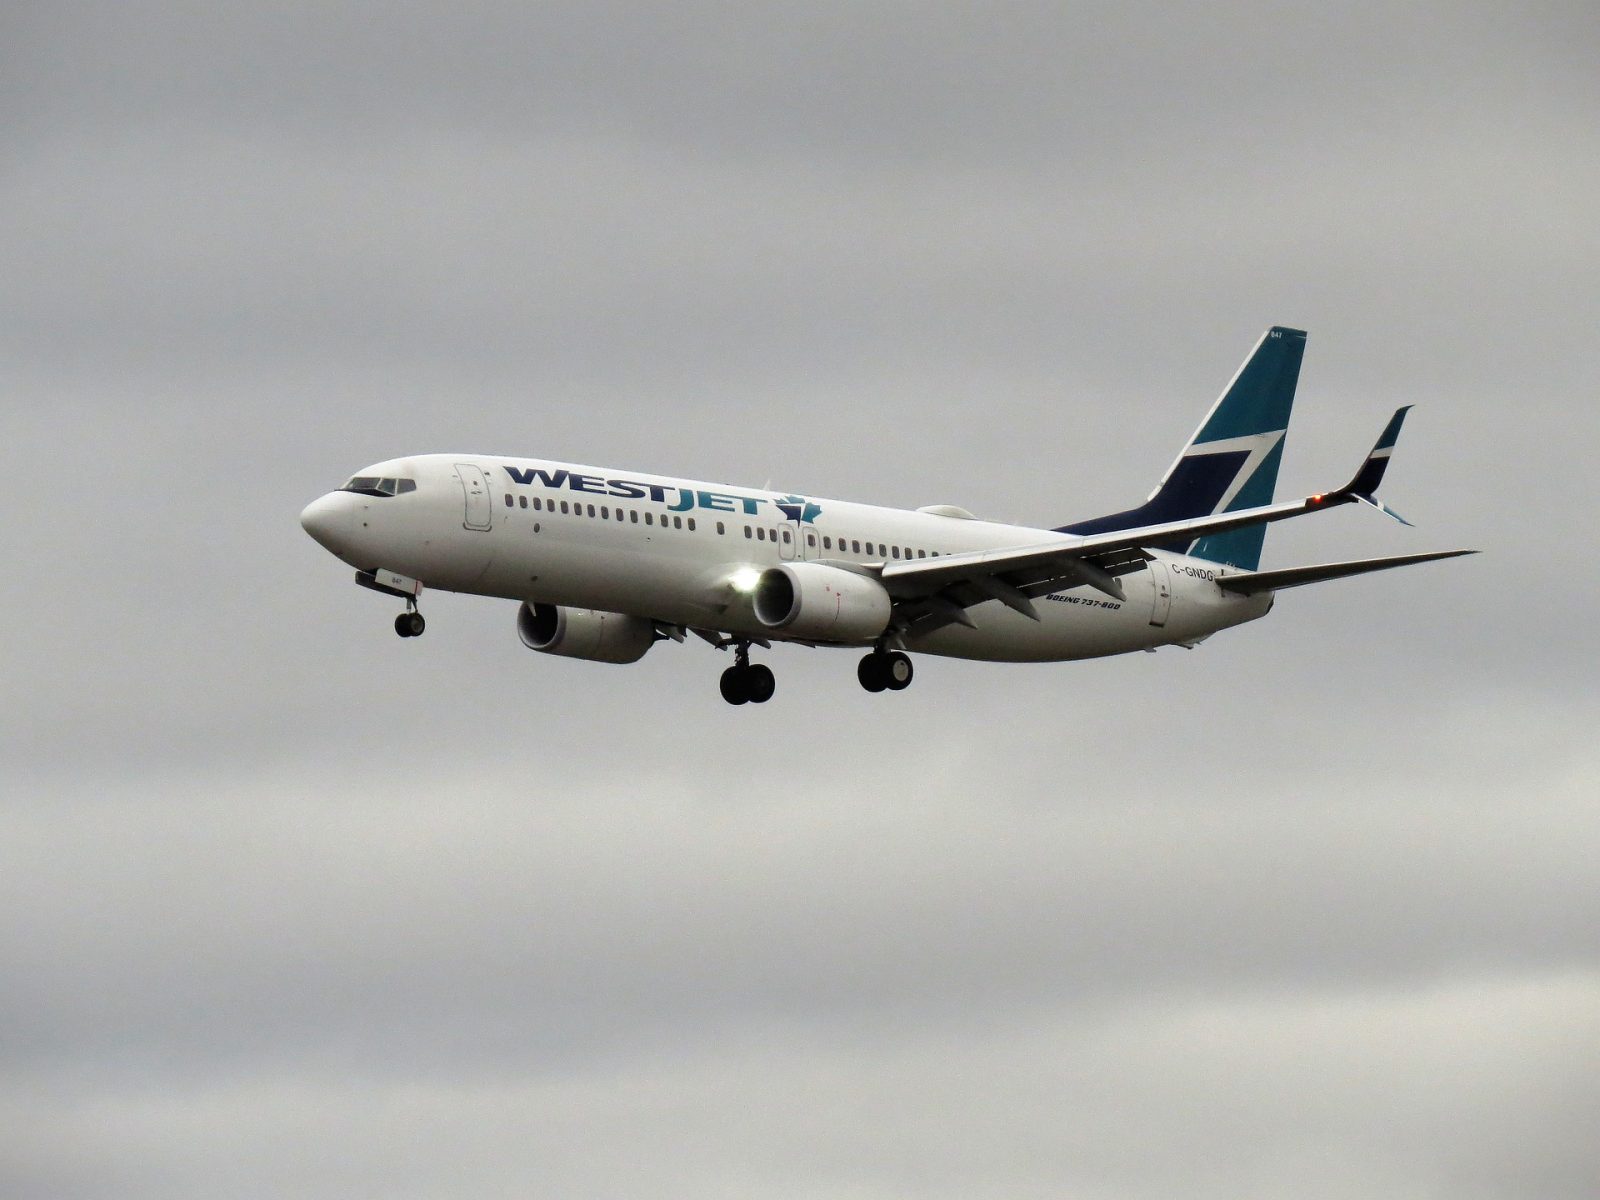 westjet has expanded air service from edmonton to cities in the USA and canada